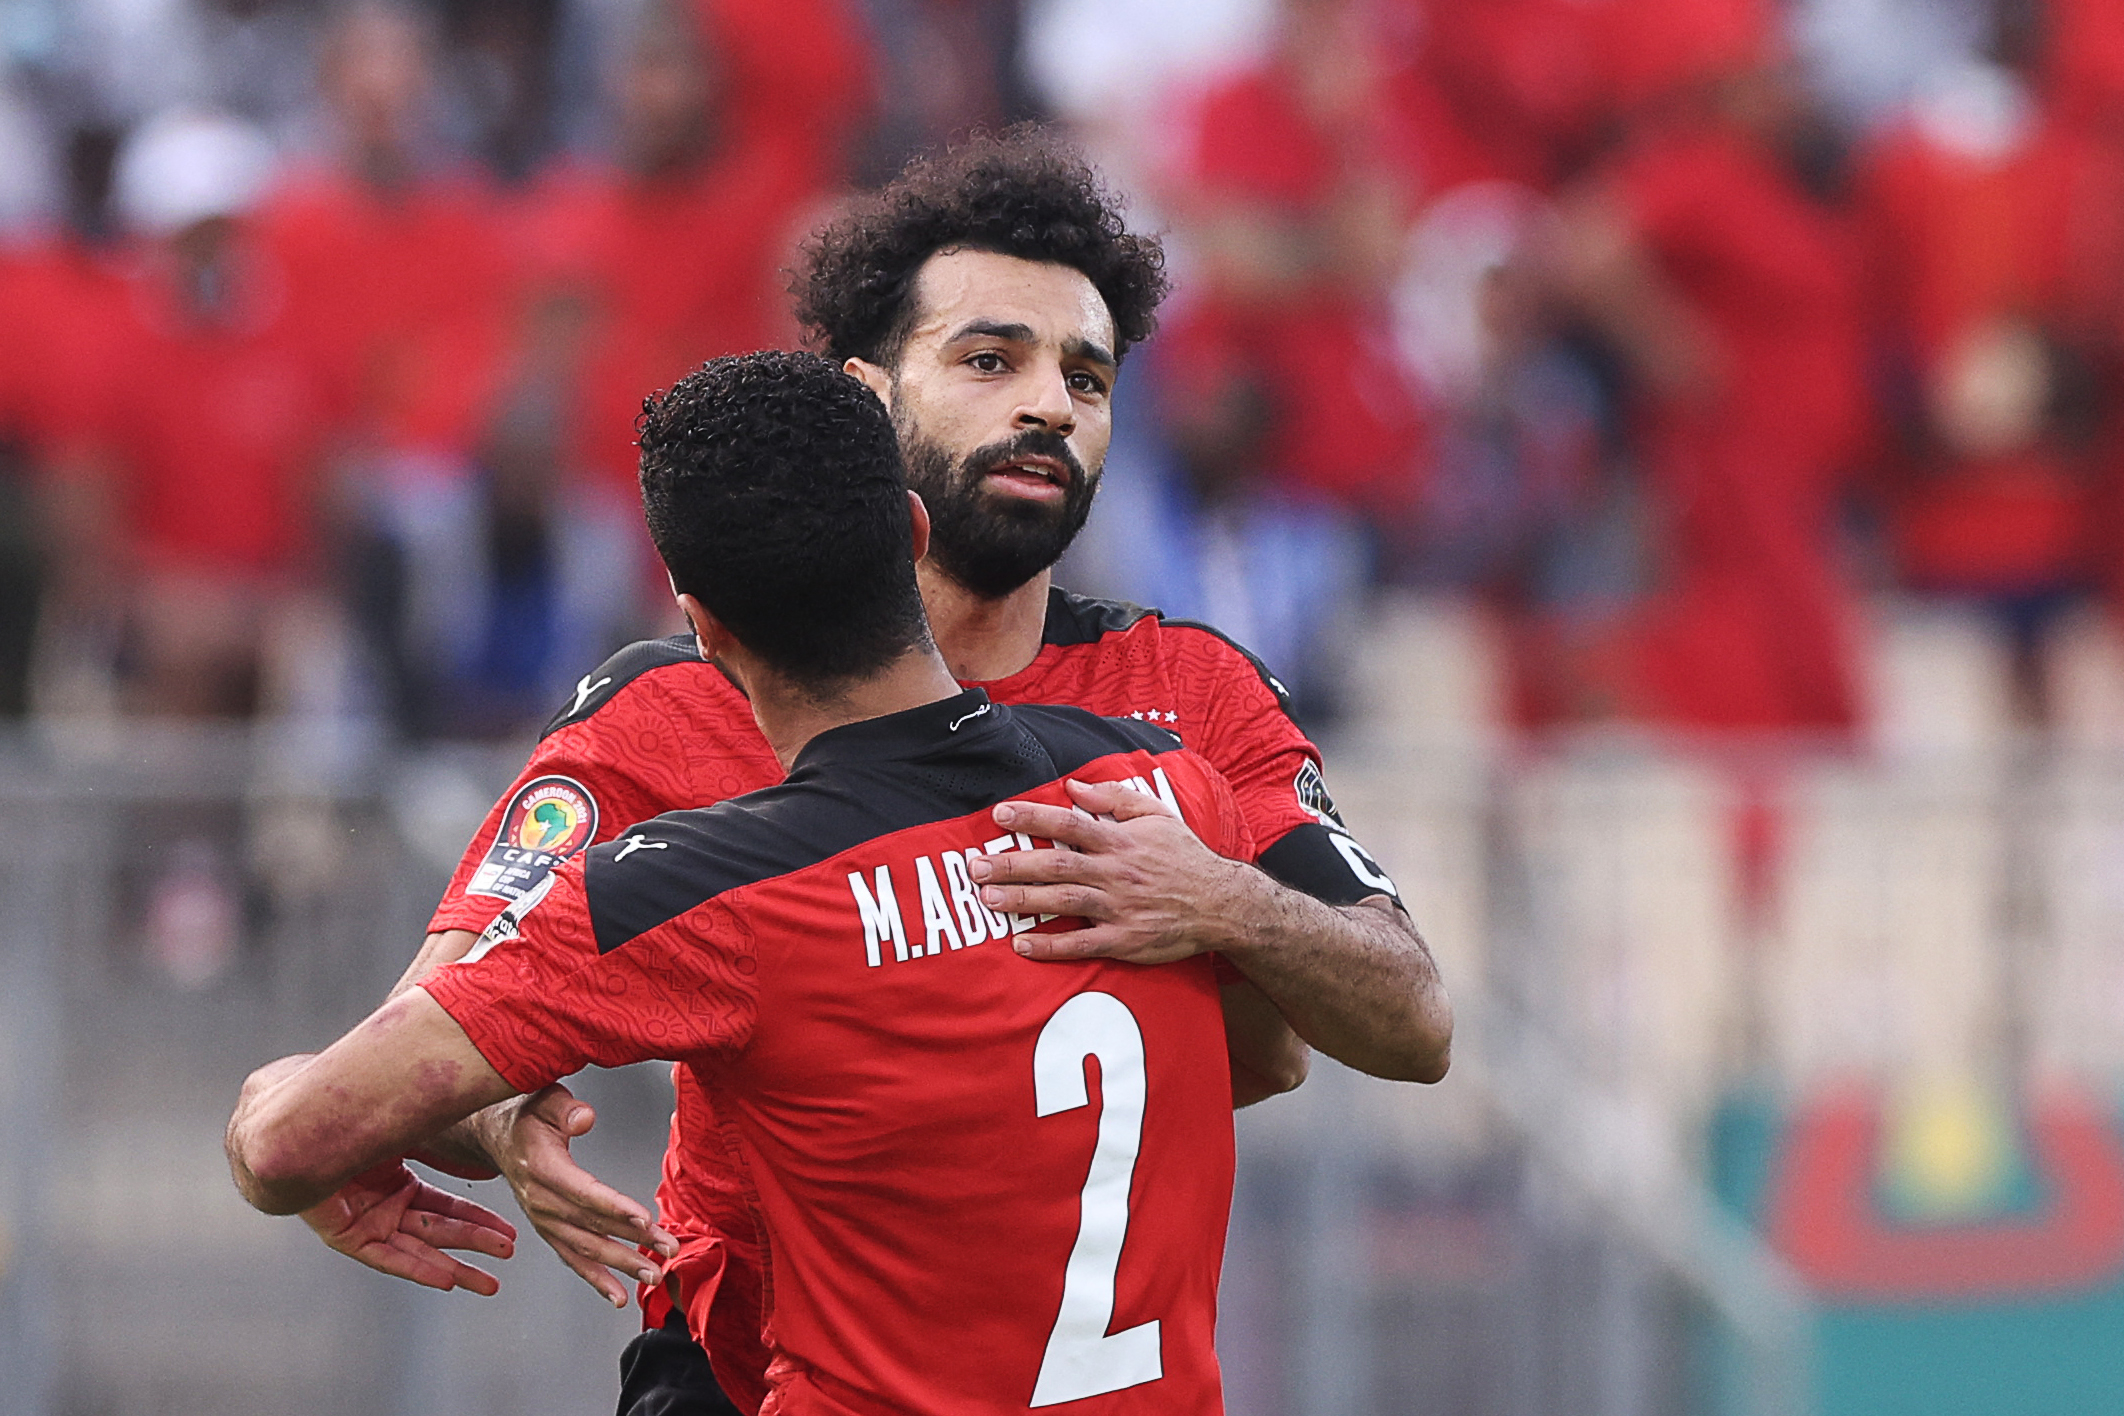 We’re fine physically but we have to fight with our mind, asserts Mohamed Salah